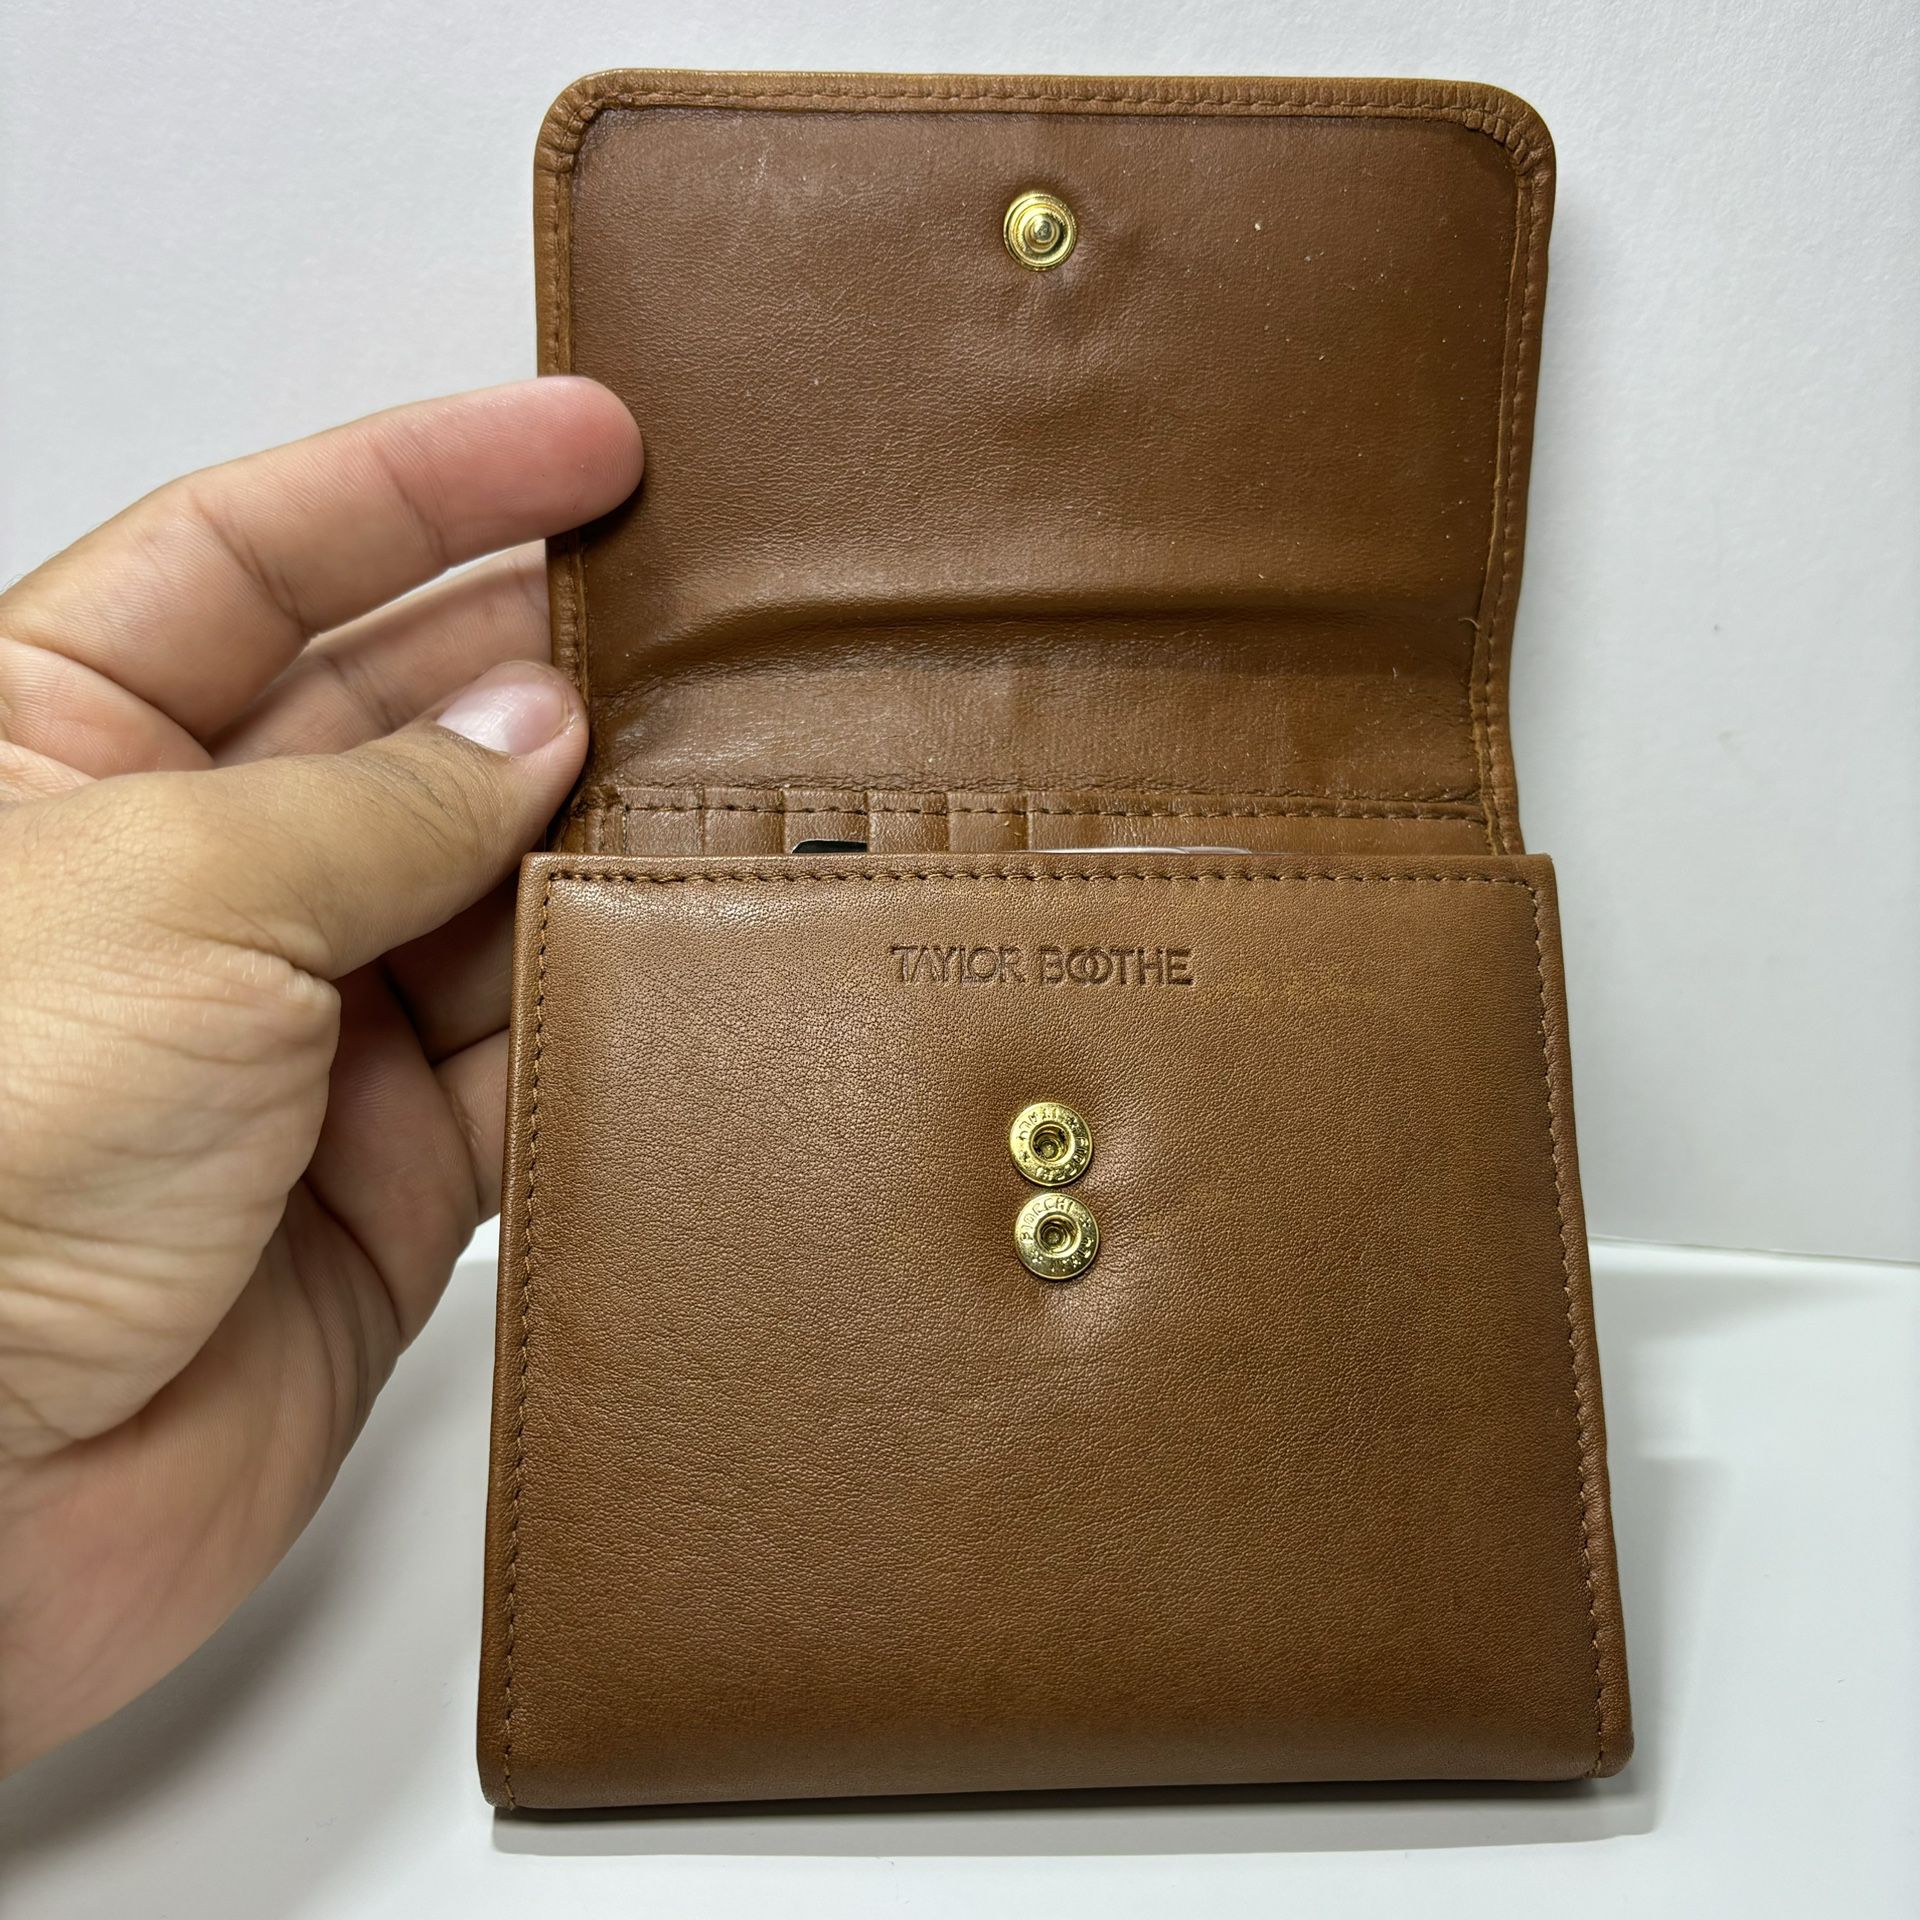 Taylor Boothe genuine leather wallet 